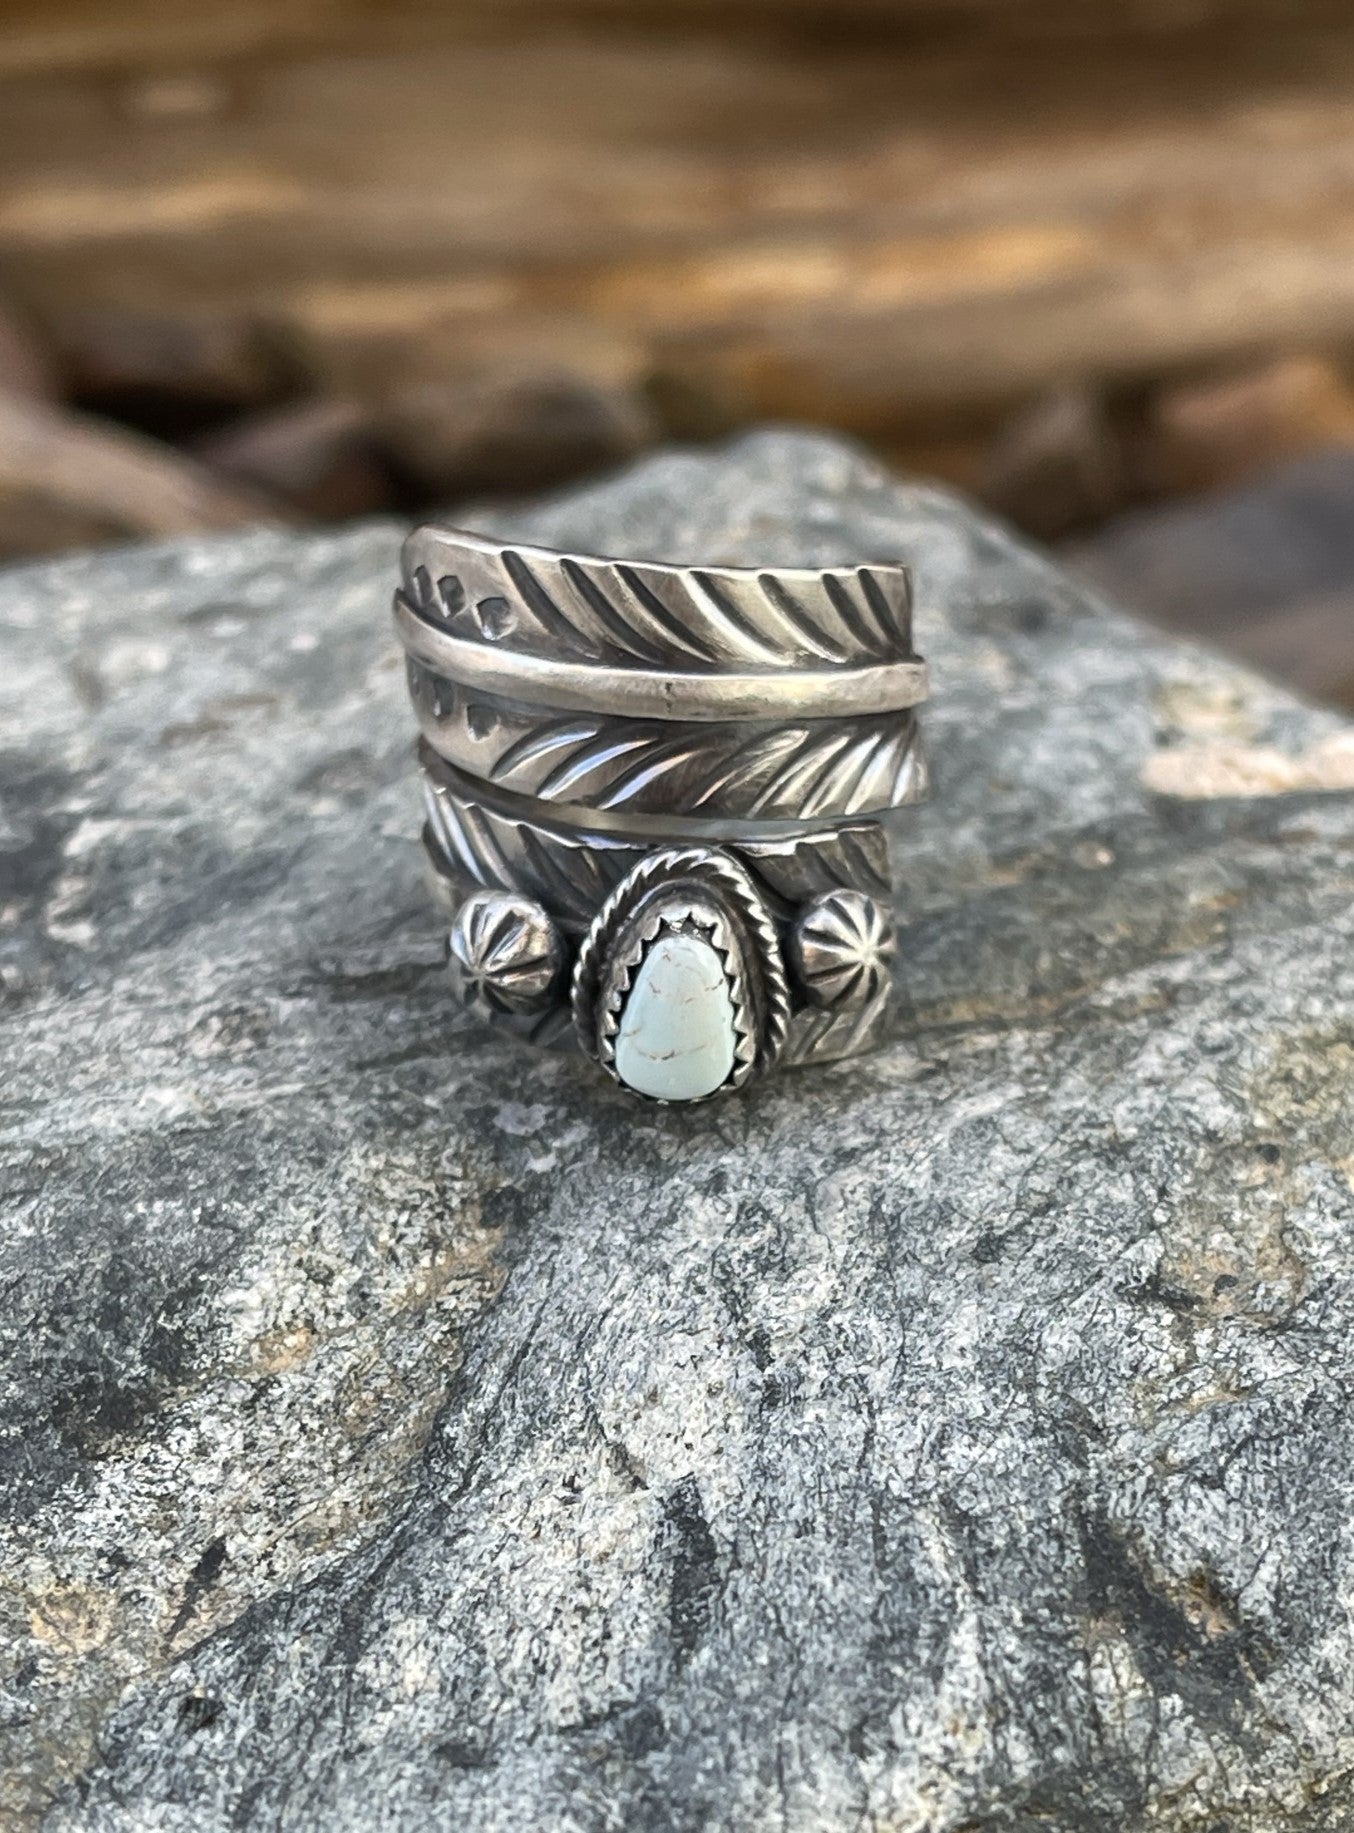 Handmade Sterling Silver Dry Creek Turquoise Feather Wrap Ring - Size 8 1/2 adjustable